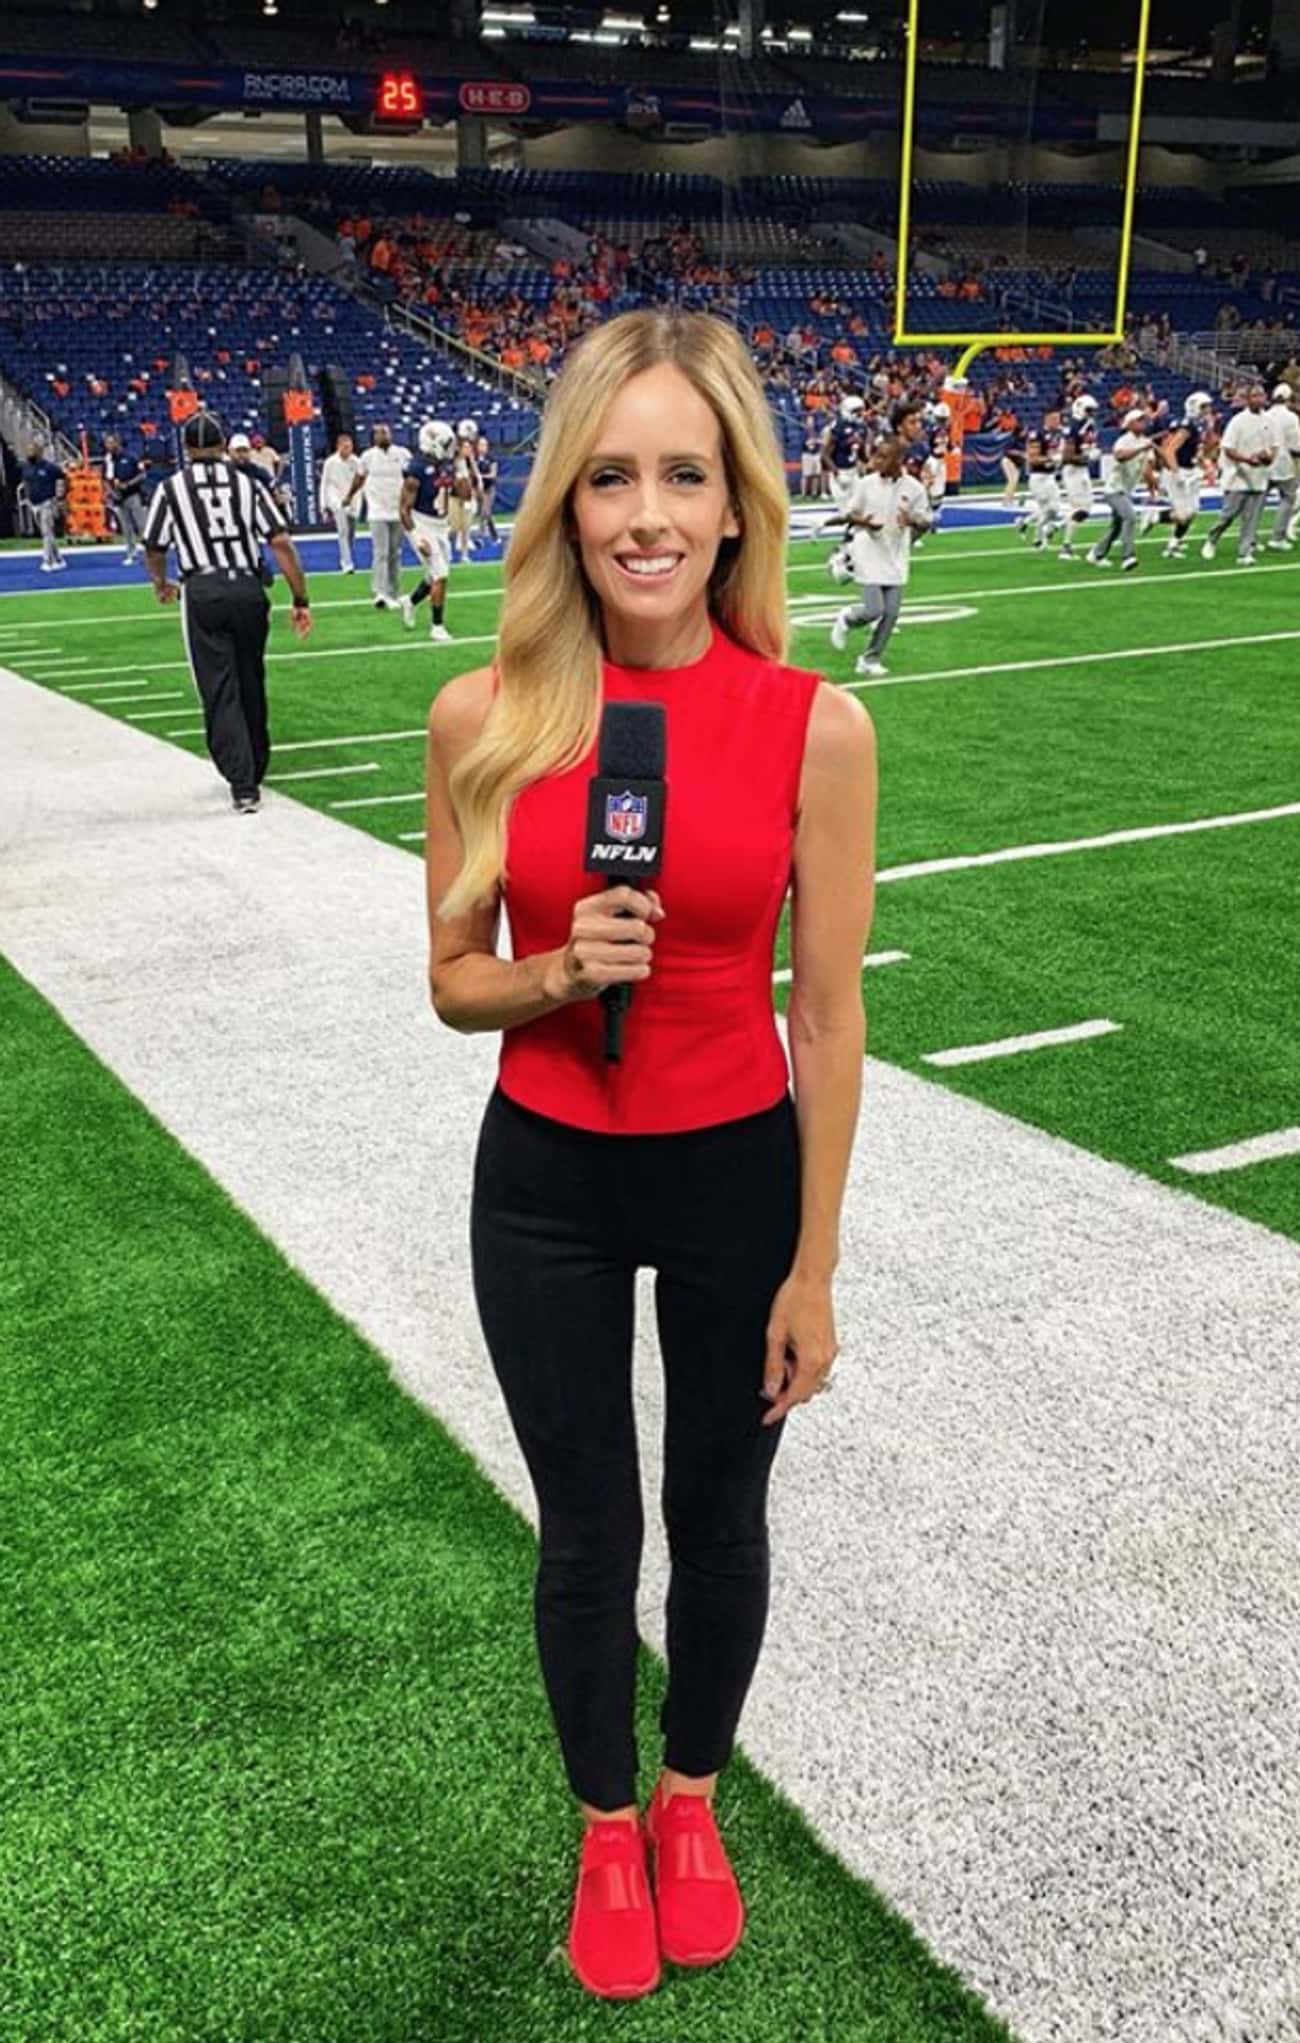 The Most Stunning Female Sports Anchors and Sideline Reporters